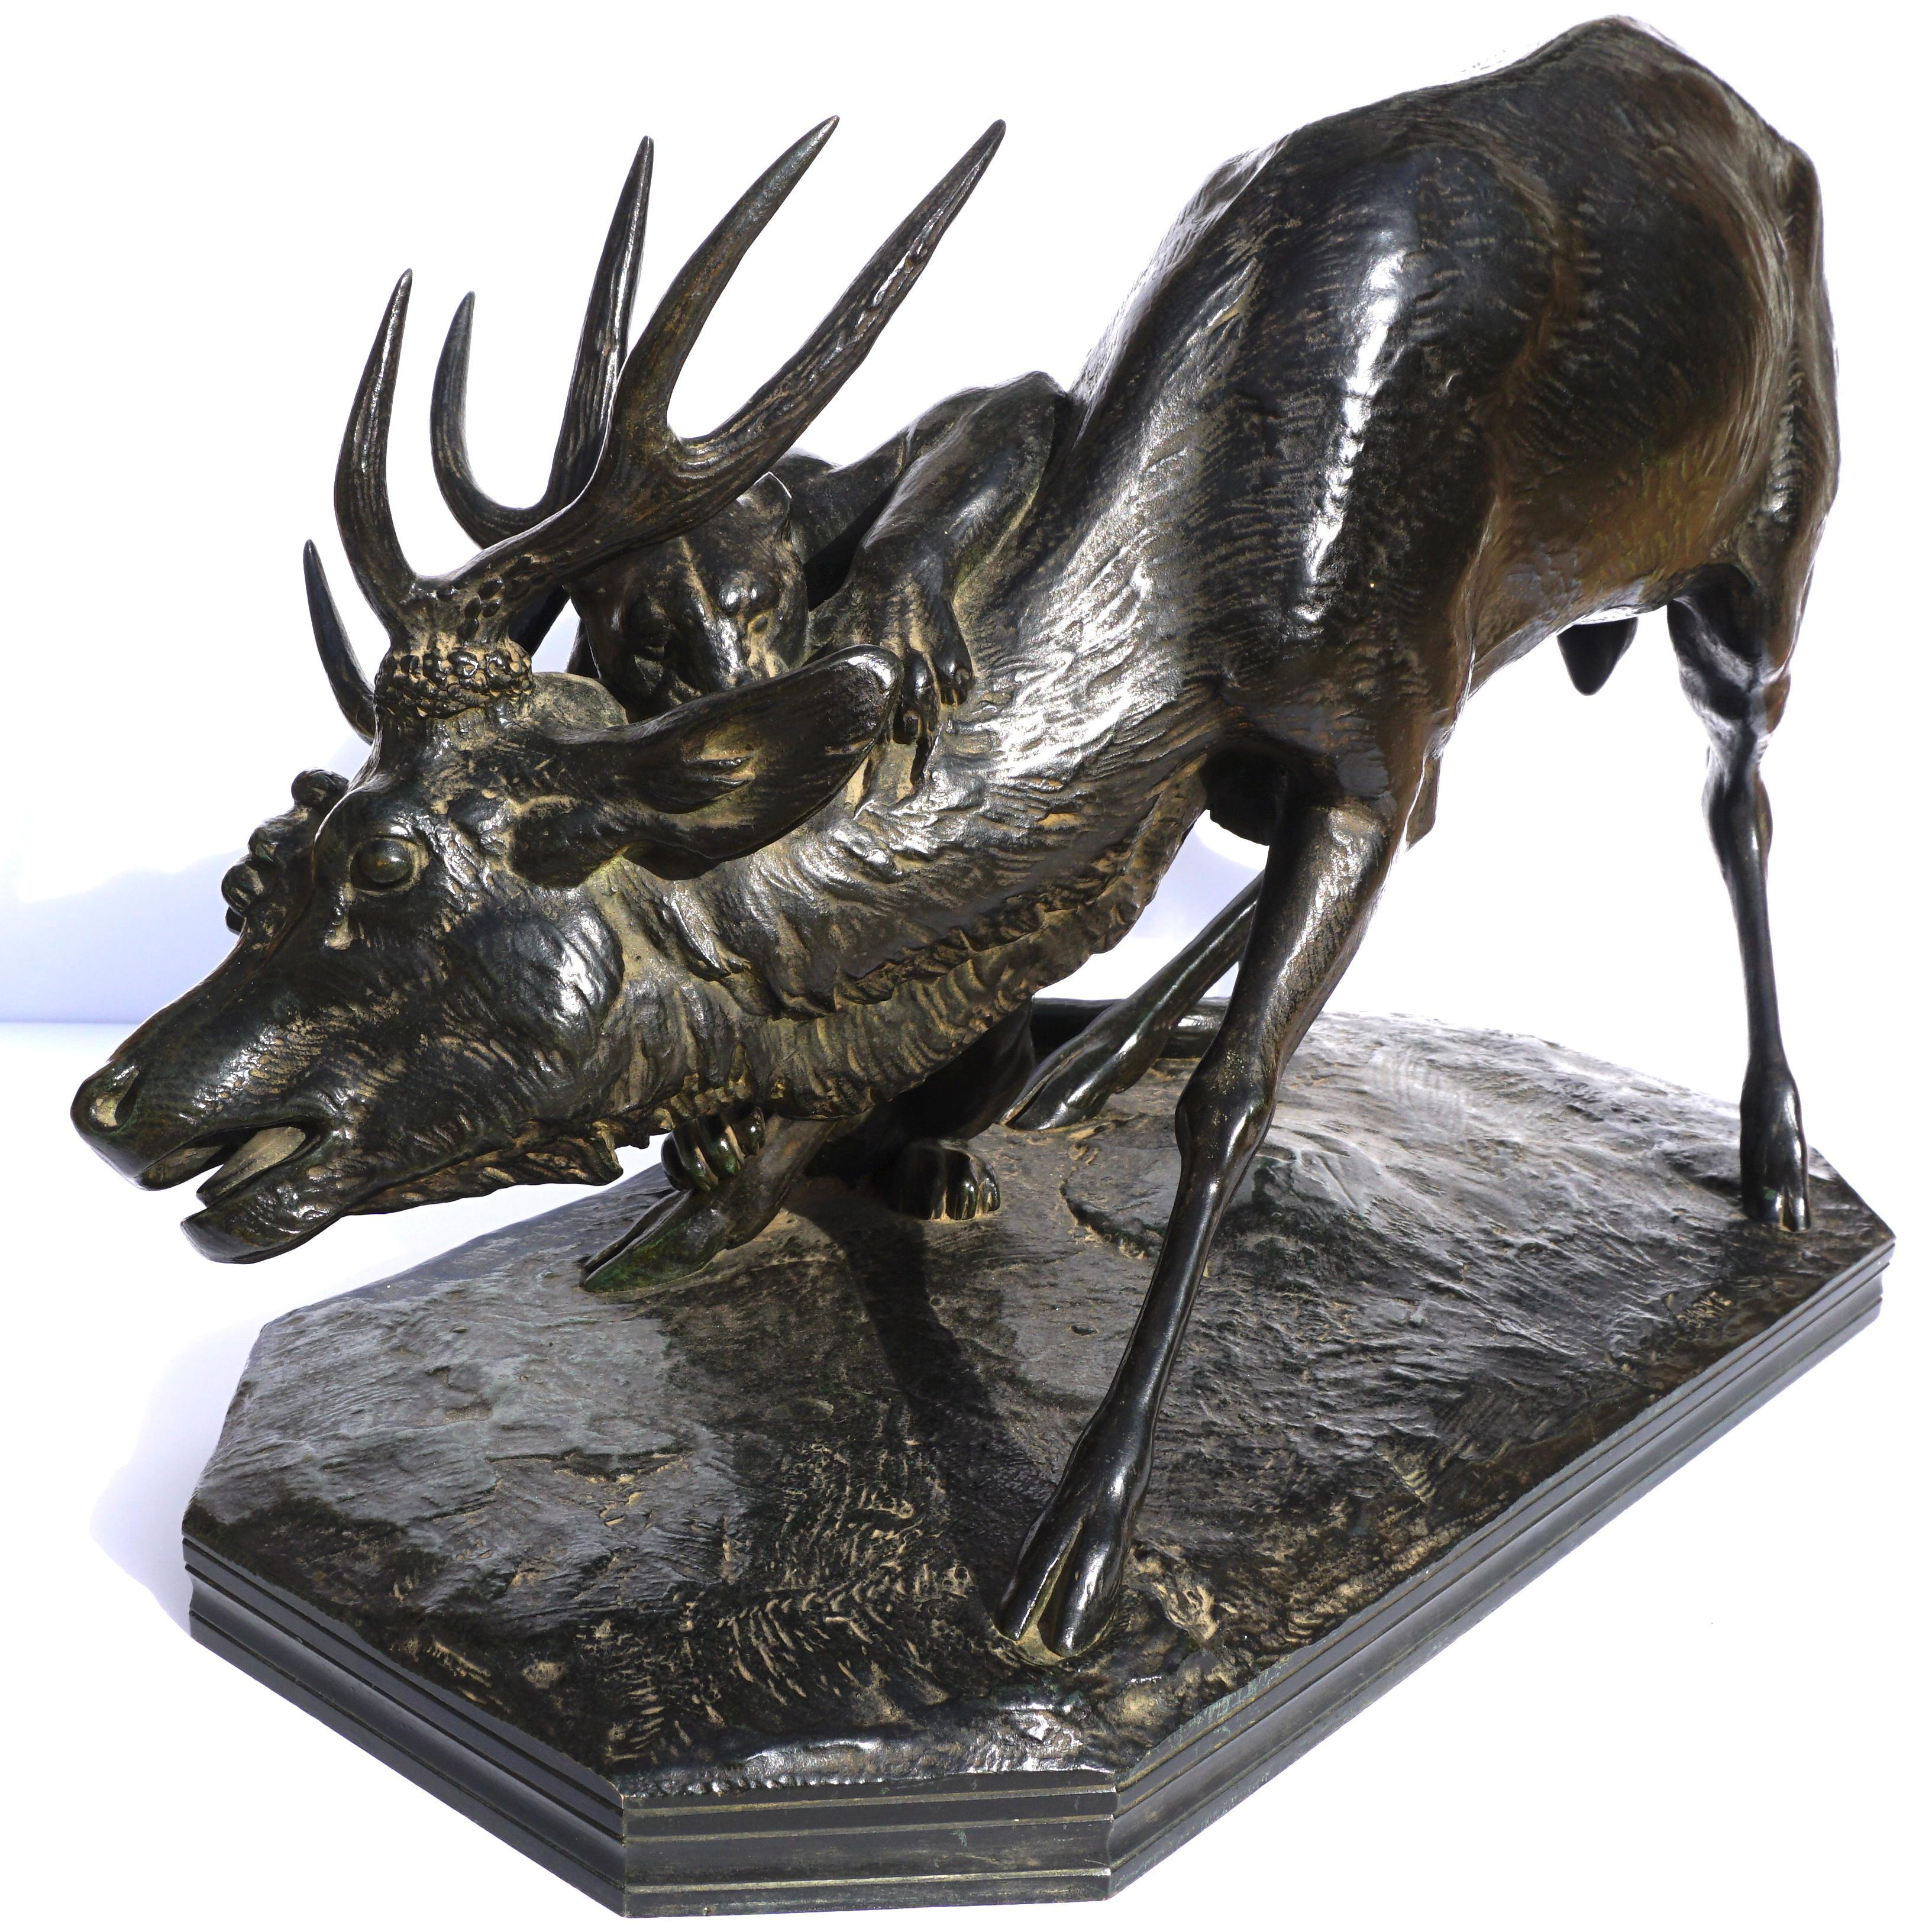 Antoine-Louis Barye (FRENCH, 1795-1875) 
Panthère saisissant un cerf (Panther seizing a stag) 
Signed: “BARYE”
Stamped: Susse Fres 
bronze, dark-green/black patina 
Measures: Height 12.75 In. (32.4 cm.) 
Width 21 Inches
Depth 10.5

Provenance: